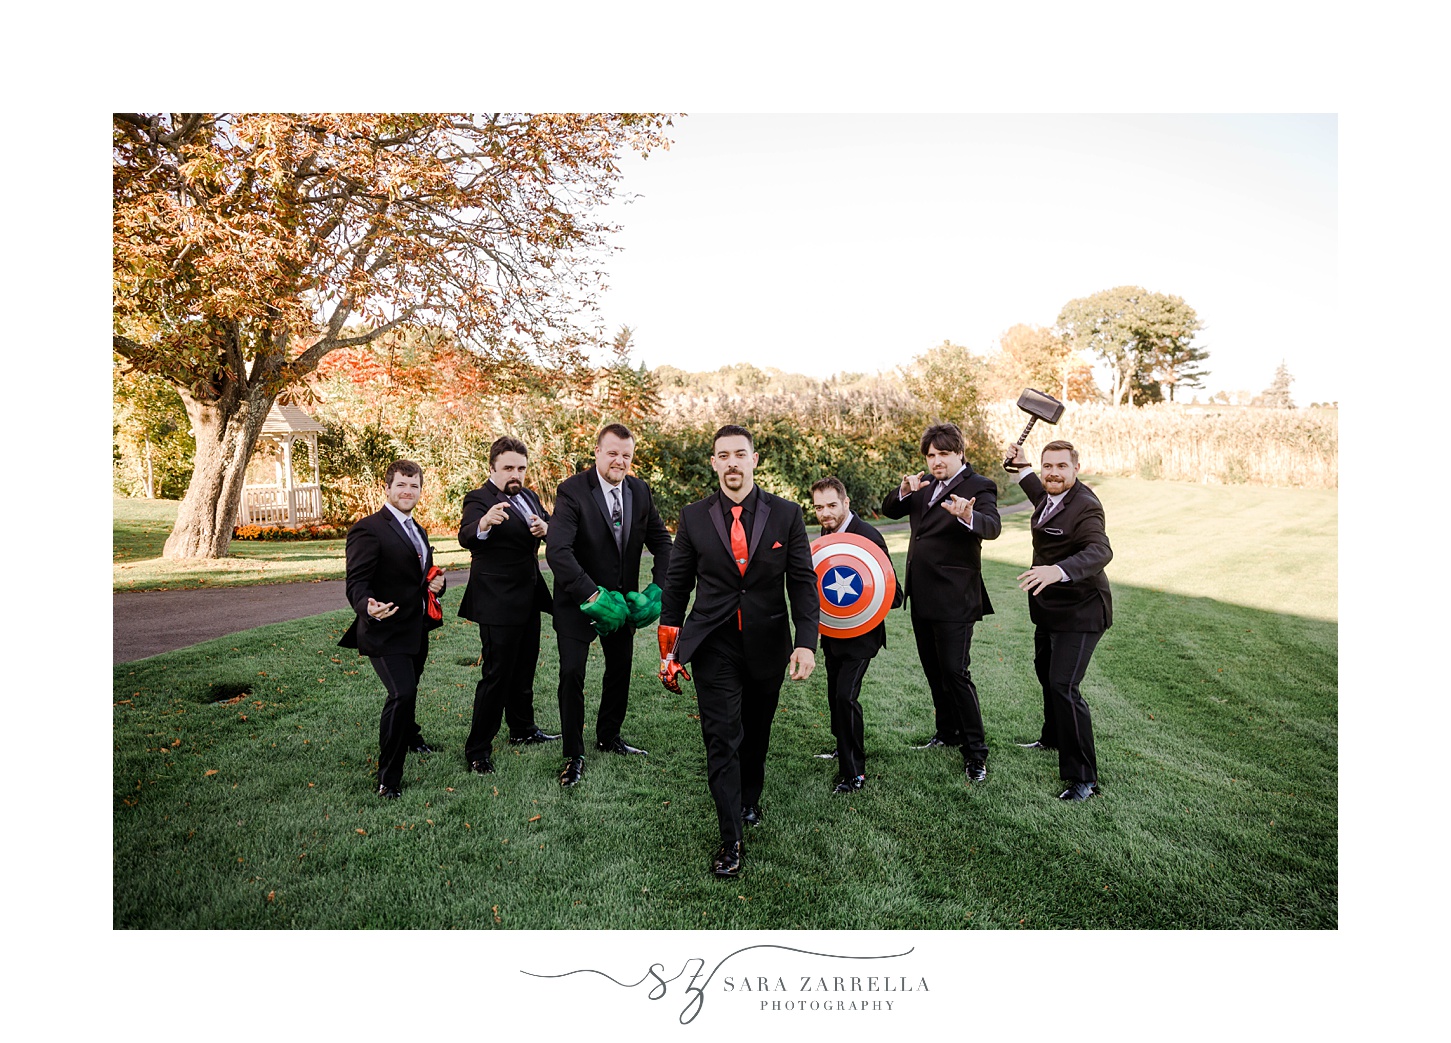 groom and groomsmen walk with Marvel character props on lawn at Quidnessett Country Club